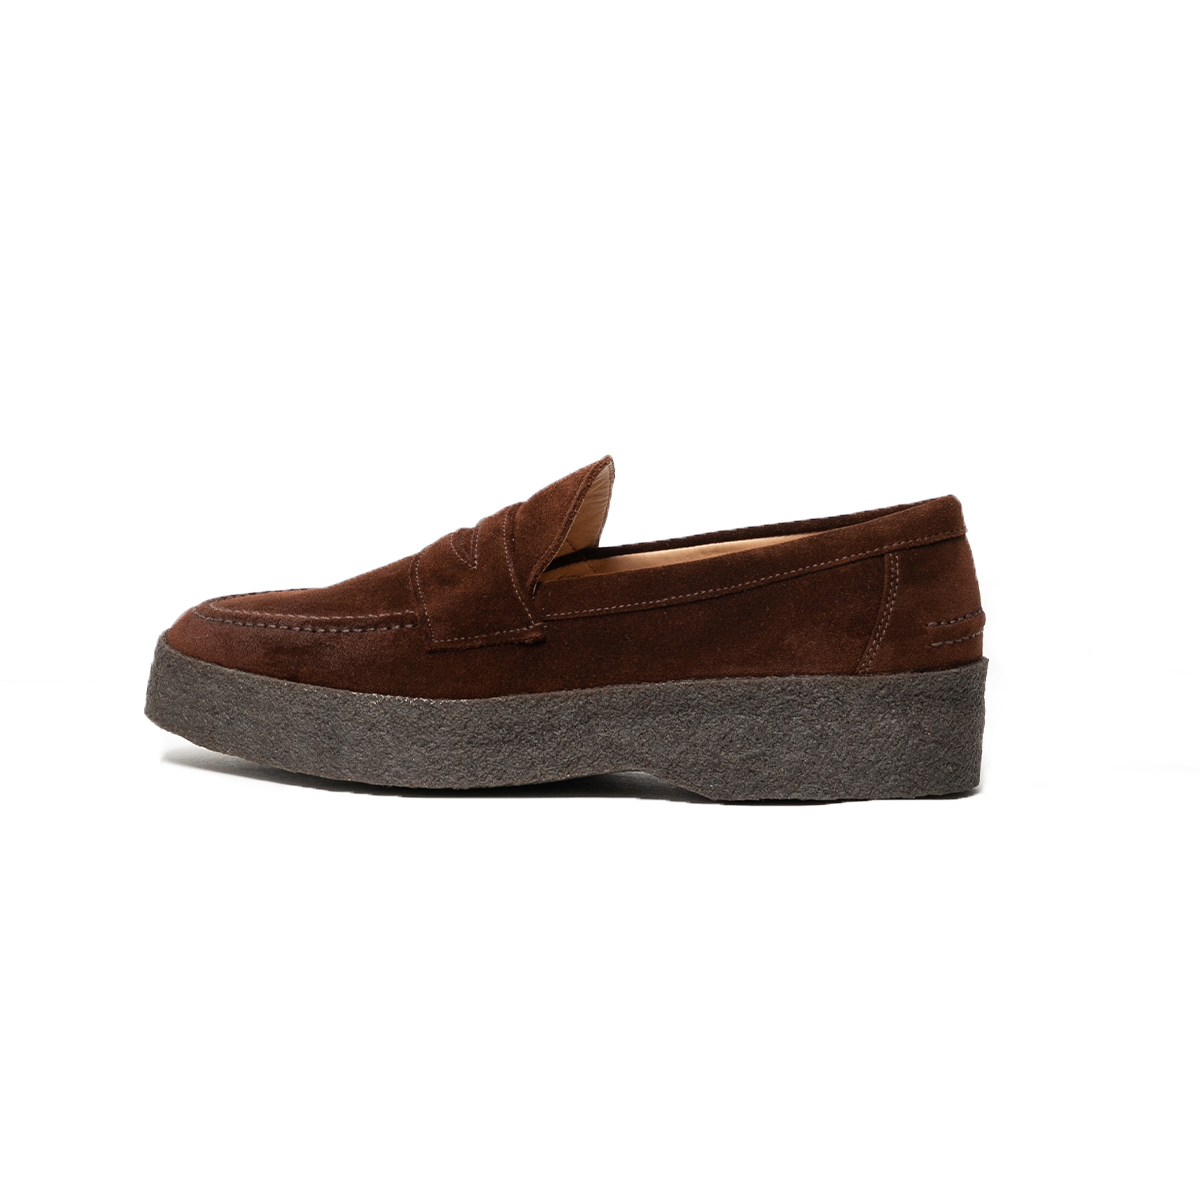 COW LEATHER LOAFER by SANDERS | hobo